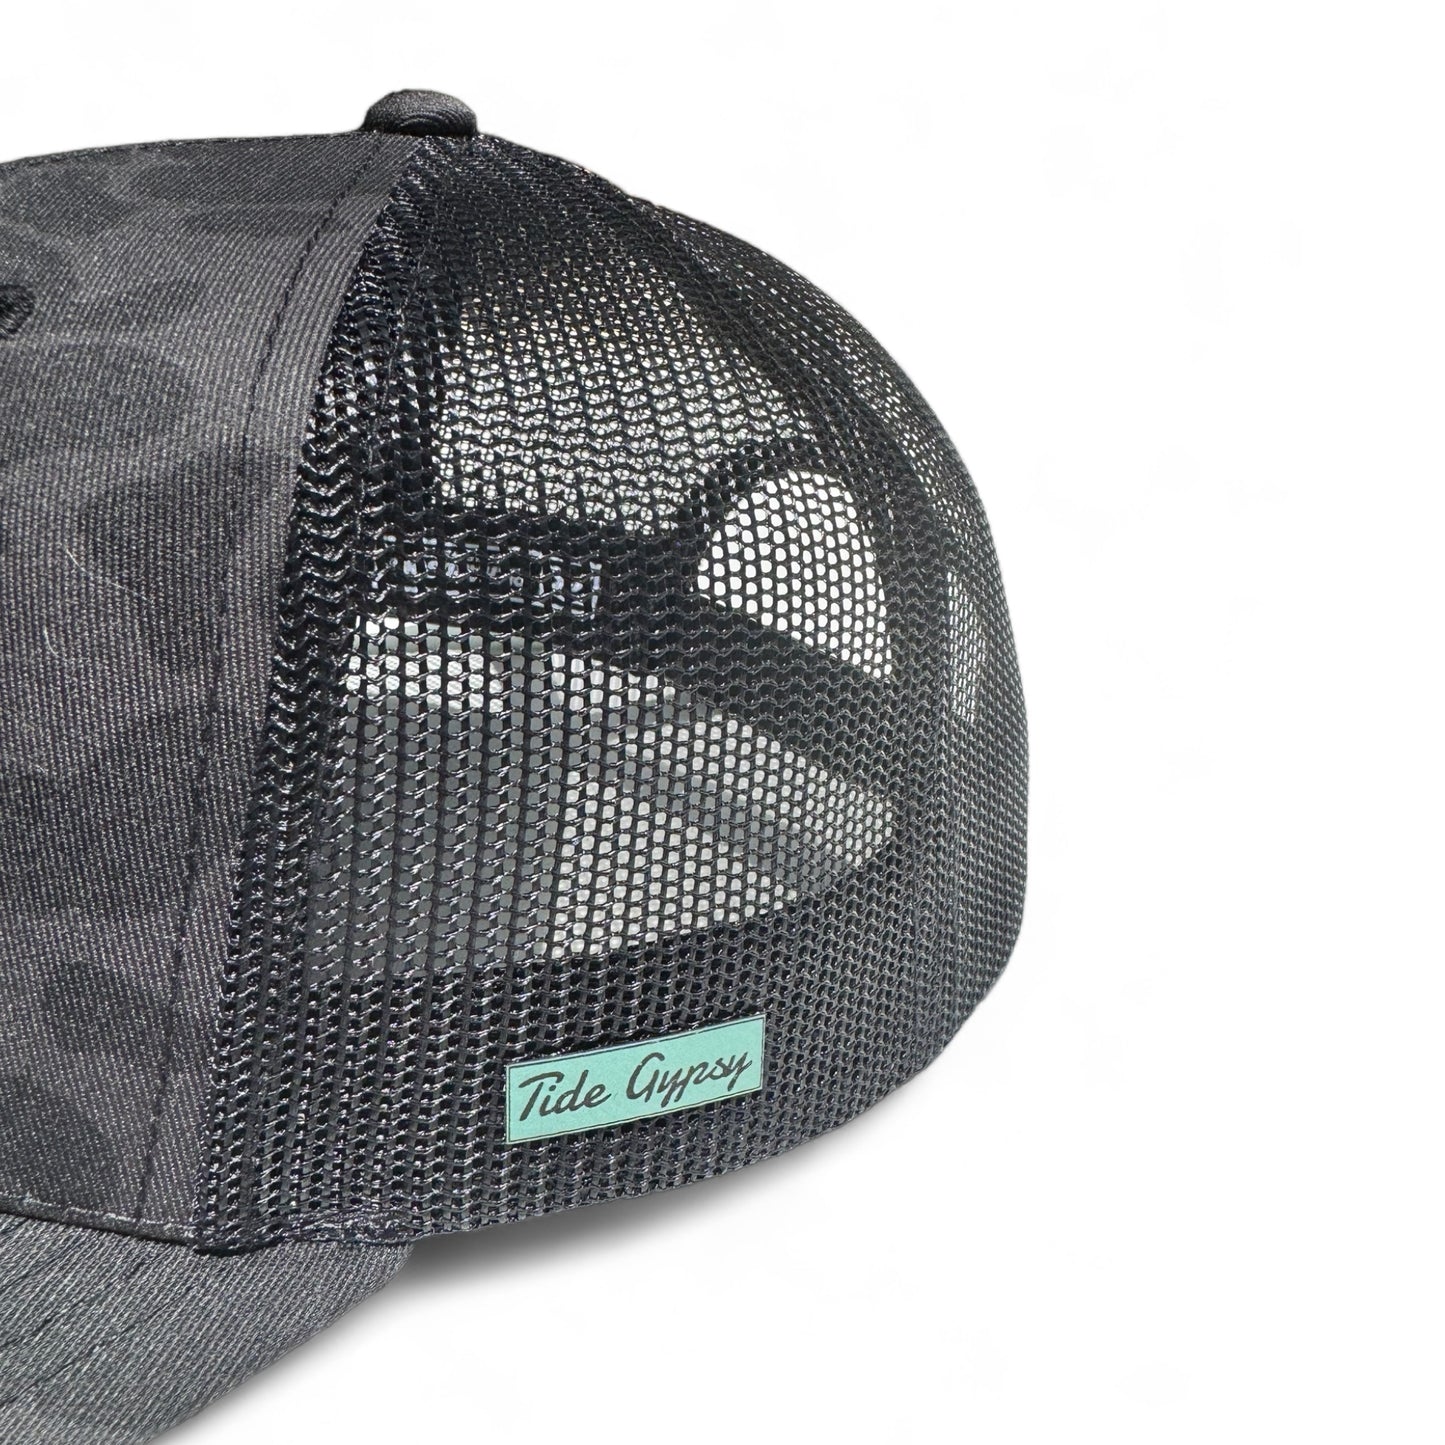 Grey Camo Snapback with Frigate Patch - Teal